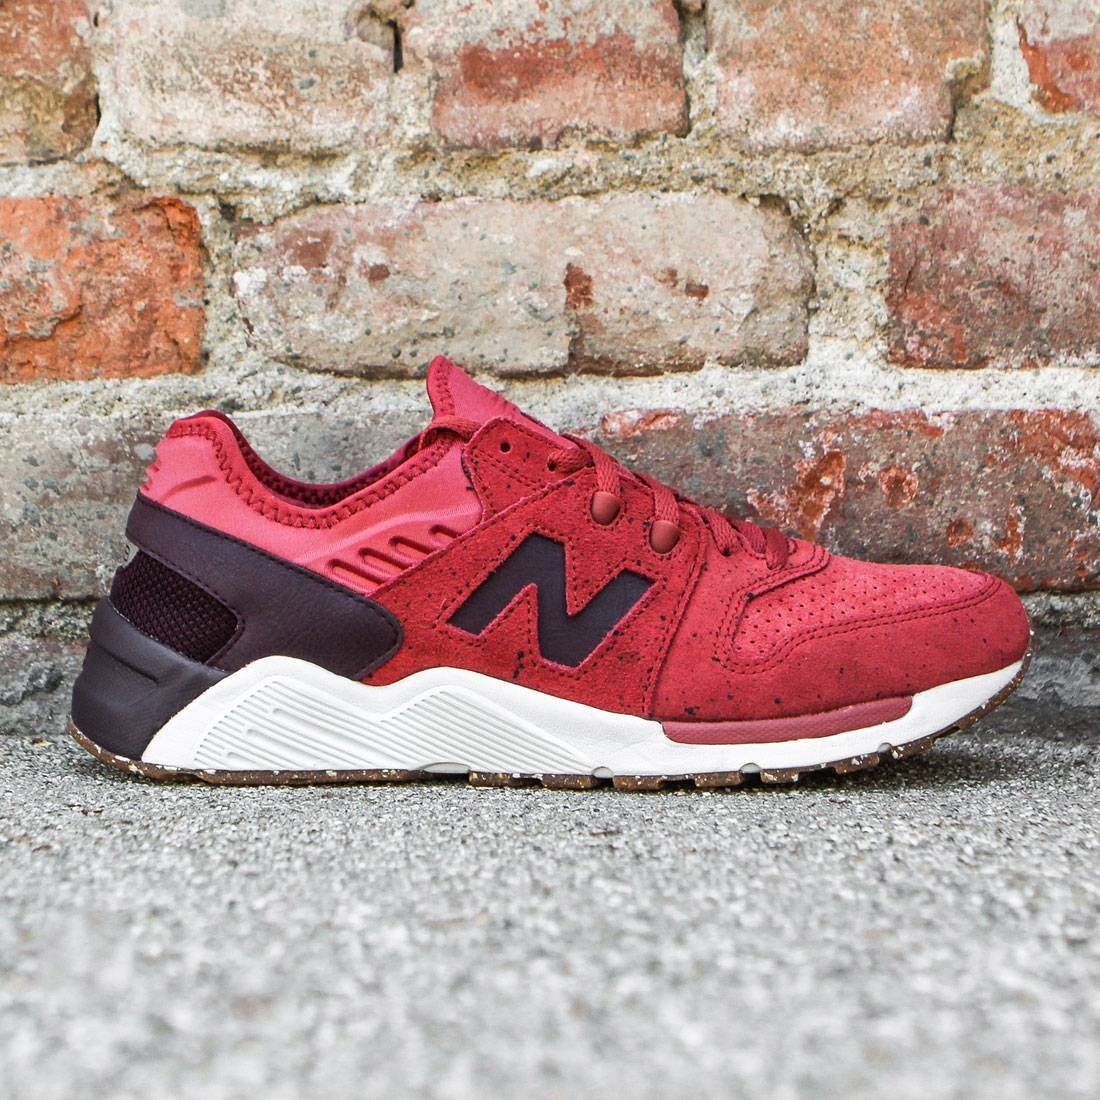 New Balance Men 009 Speckle Suede ML009PN red clay red supernova red